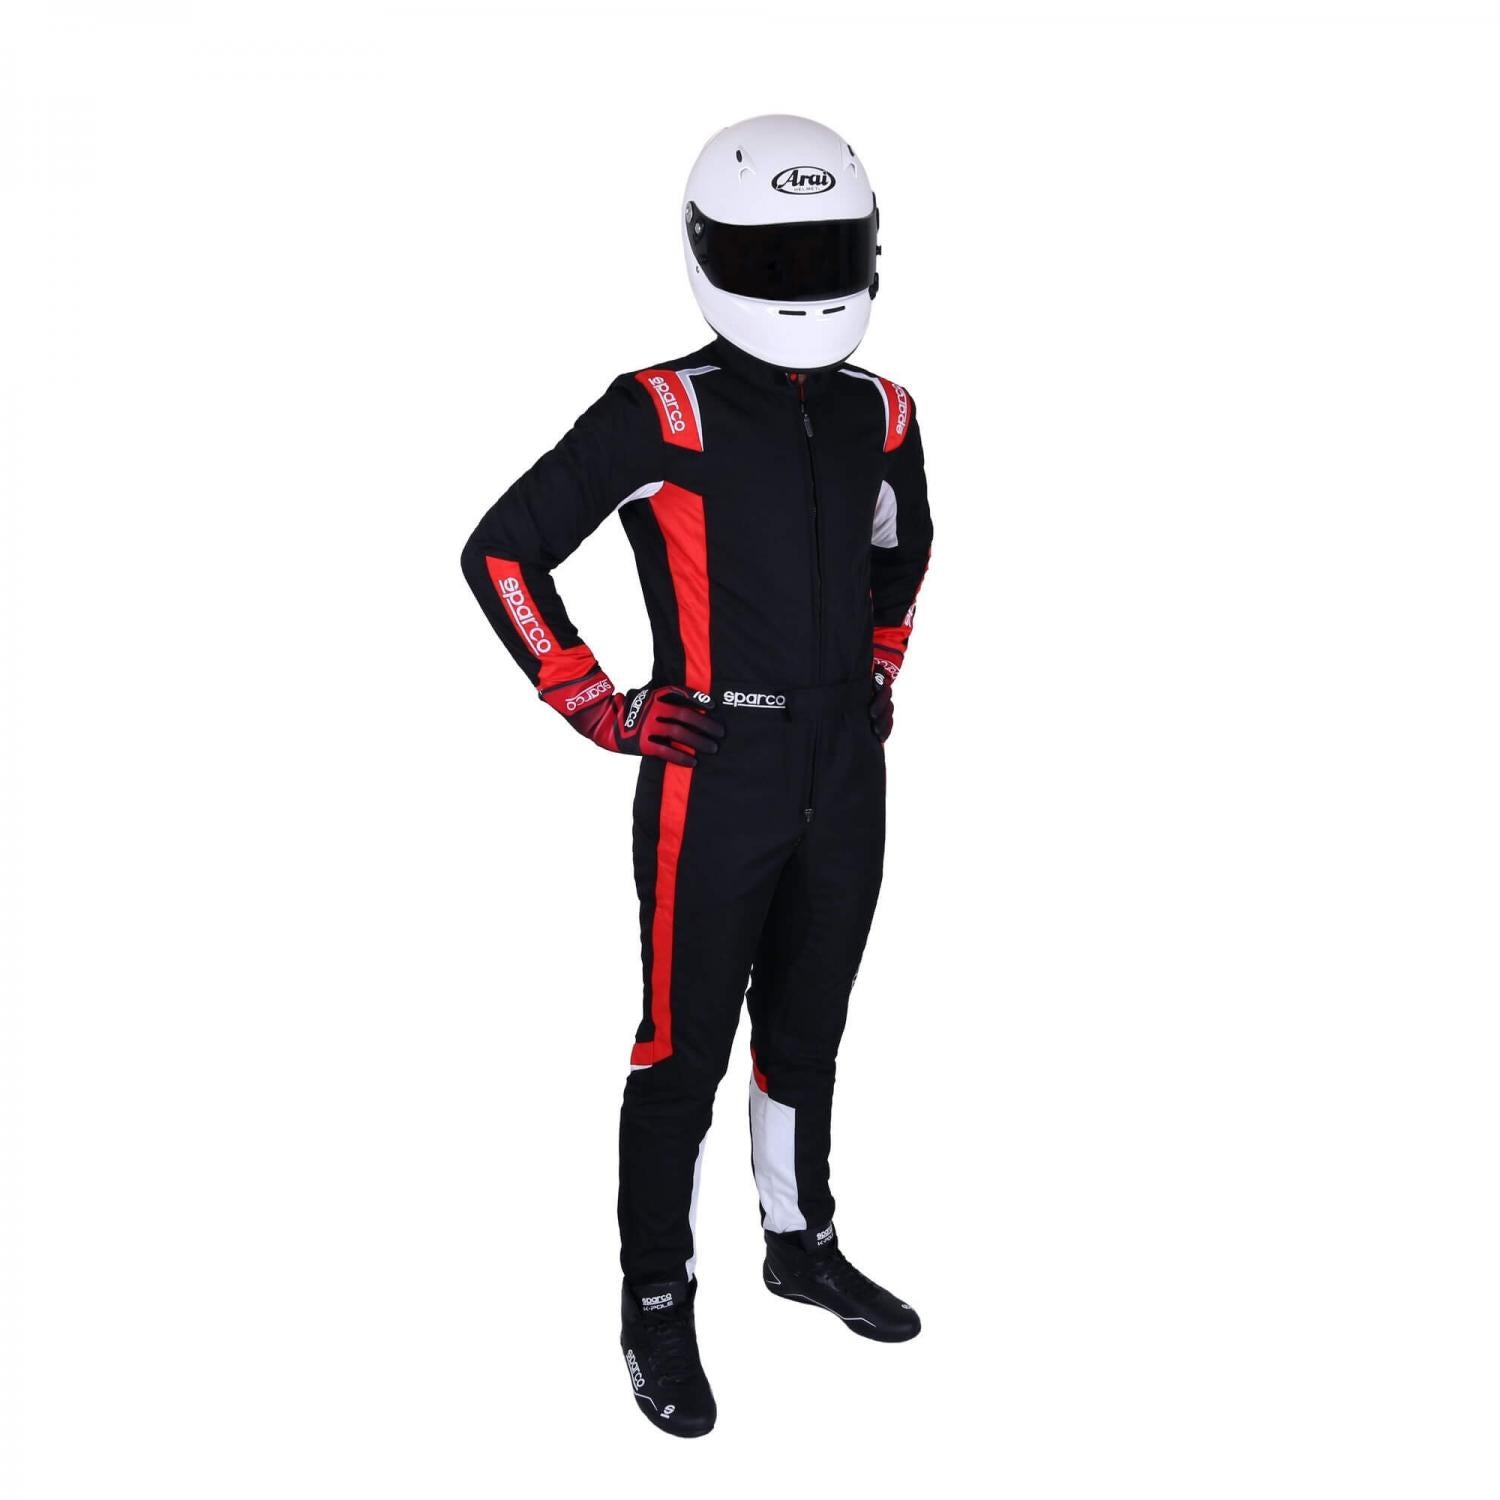 Kart Suit Sparco THUNDER K43 (Adult - Child) on Offer - Buy Now on